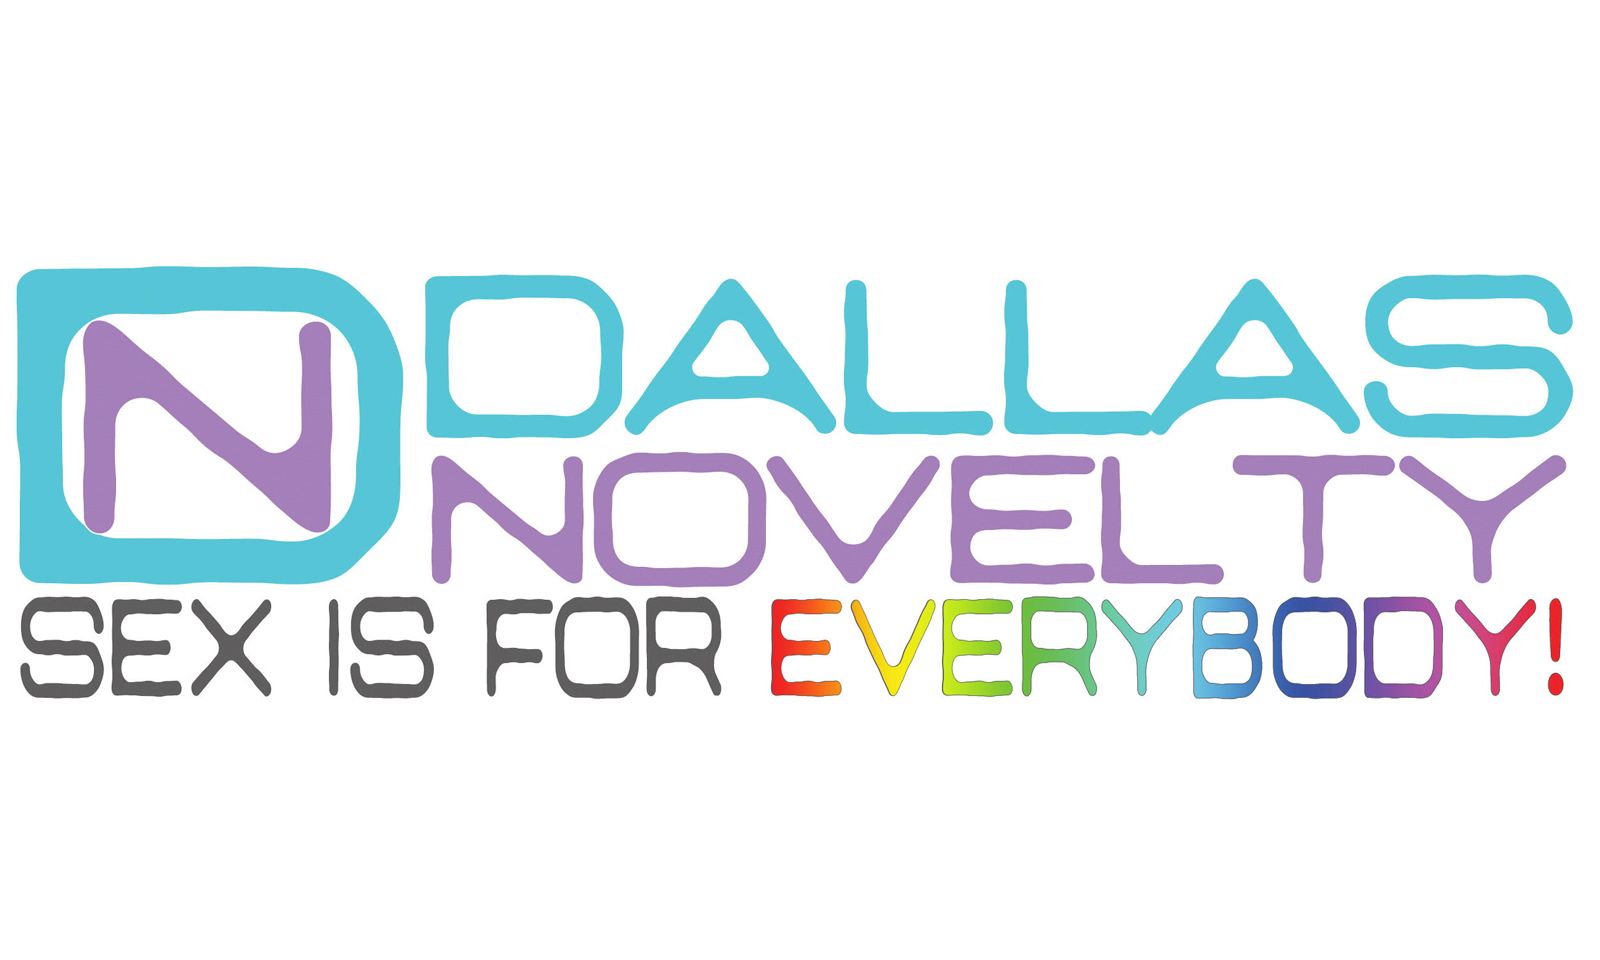 Dallas Novelty Sponsoring ‘The Radio Freaks Podcast’ with Special Offer Code